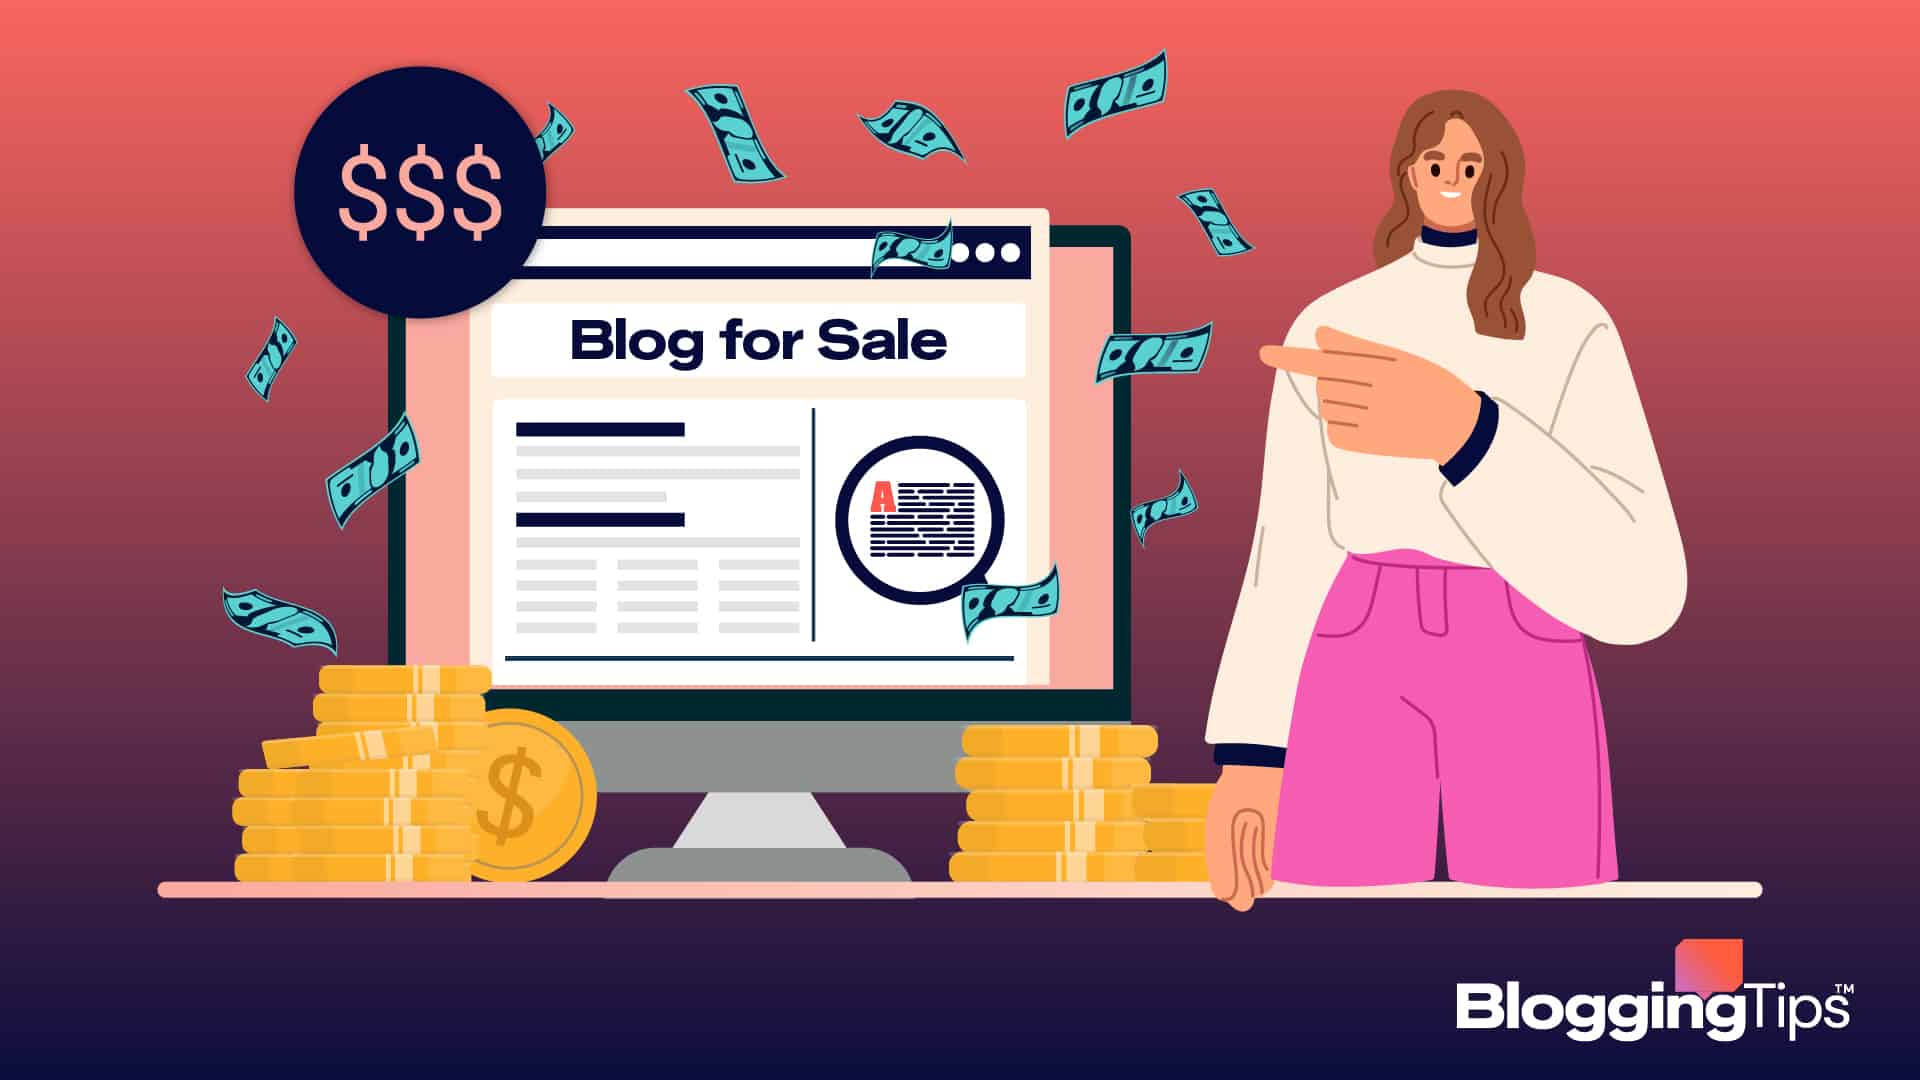 vector graphic showing an illustration of a woman selling a blog and making moneyvector graphic showing an illustration of a woman selling a blog and making money